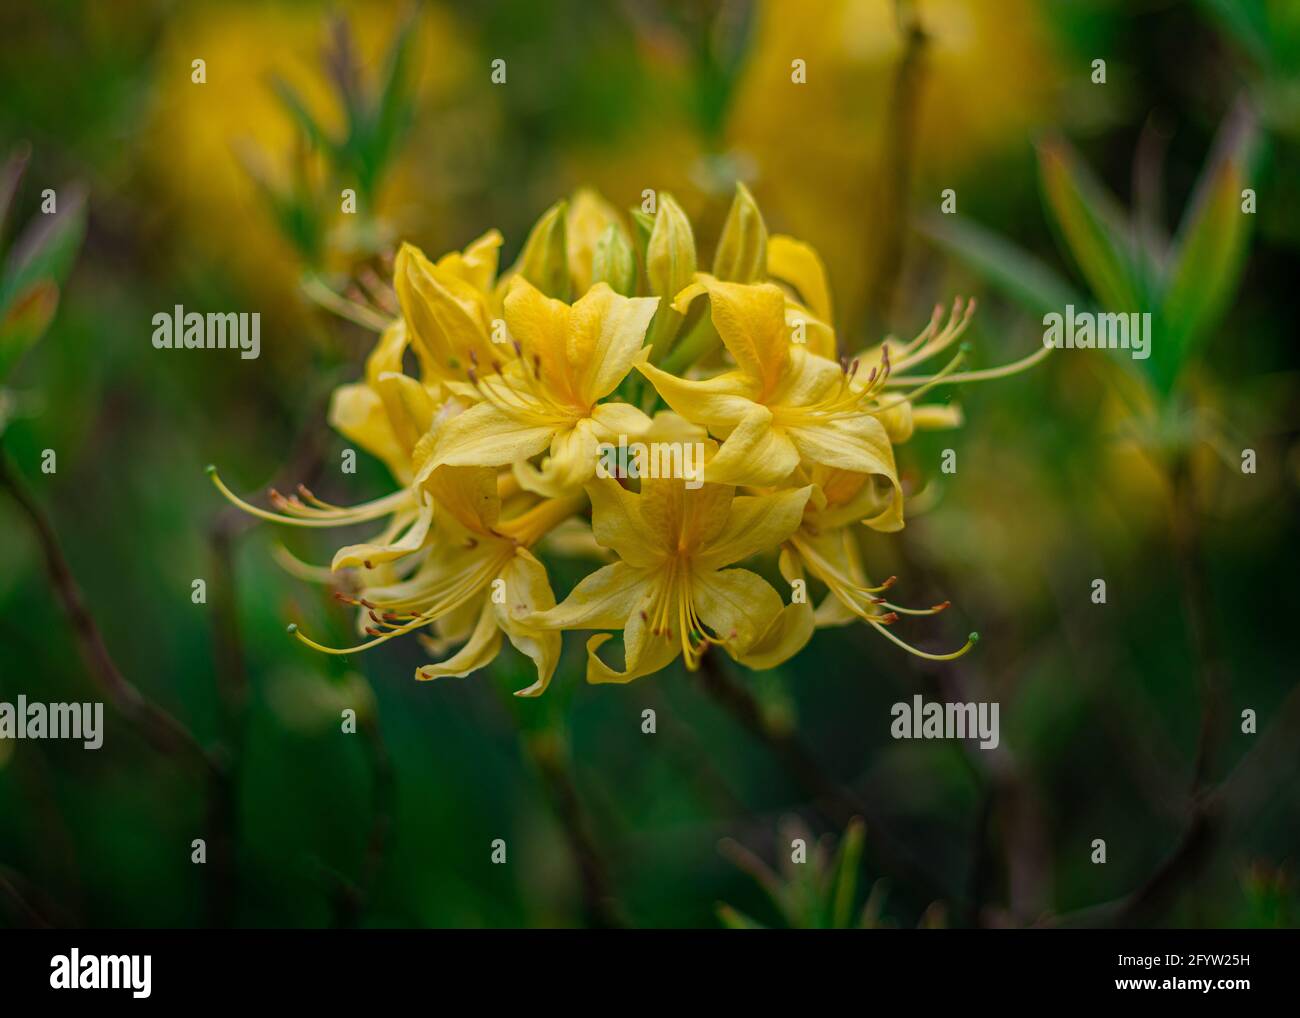 A closeup of a blooming flame azalea in the blurred background Stock Photo